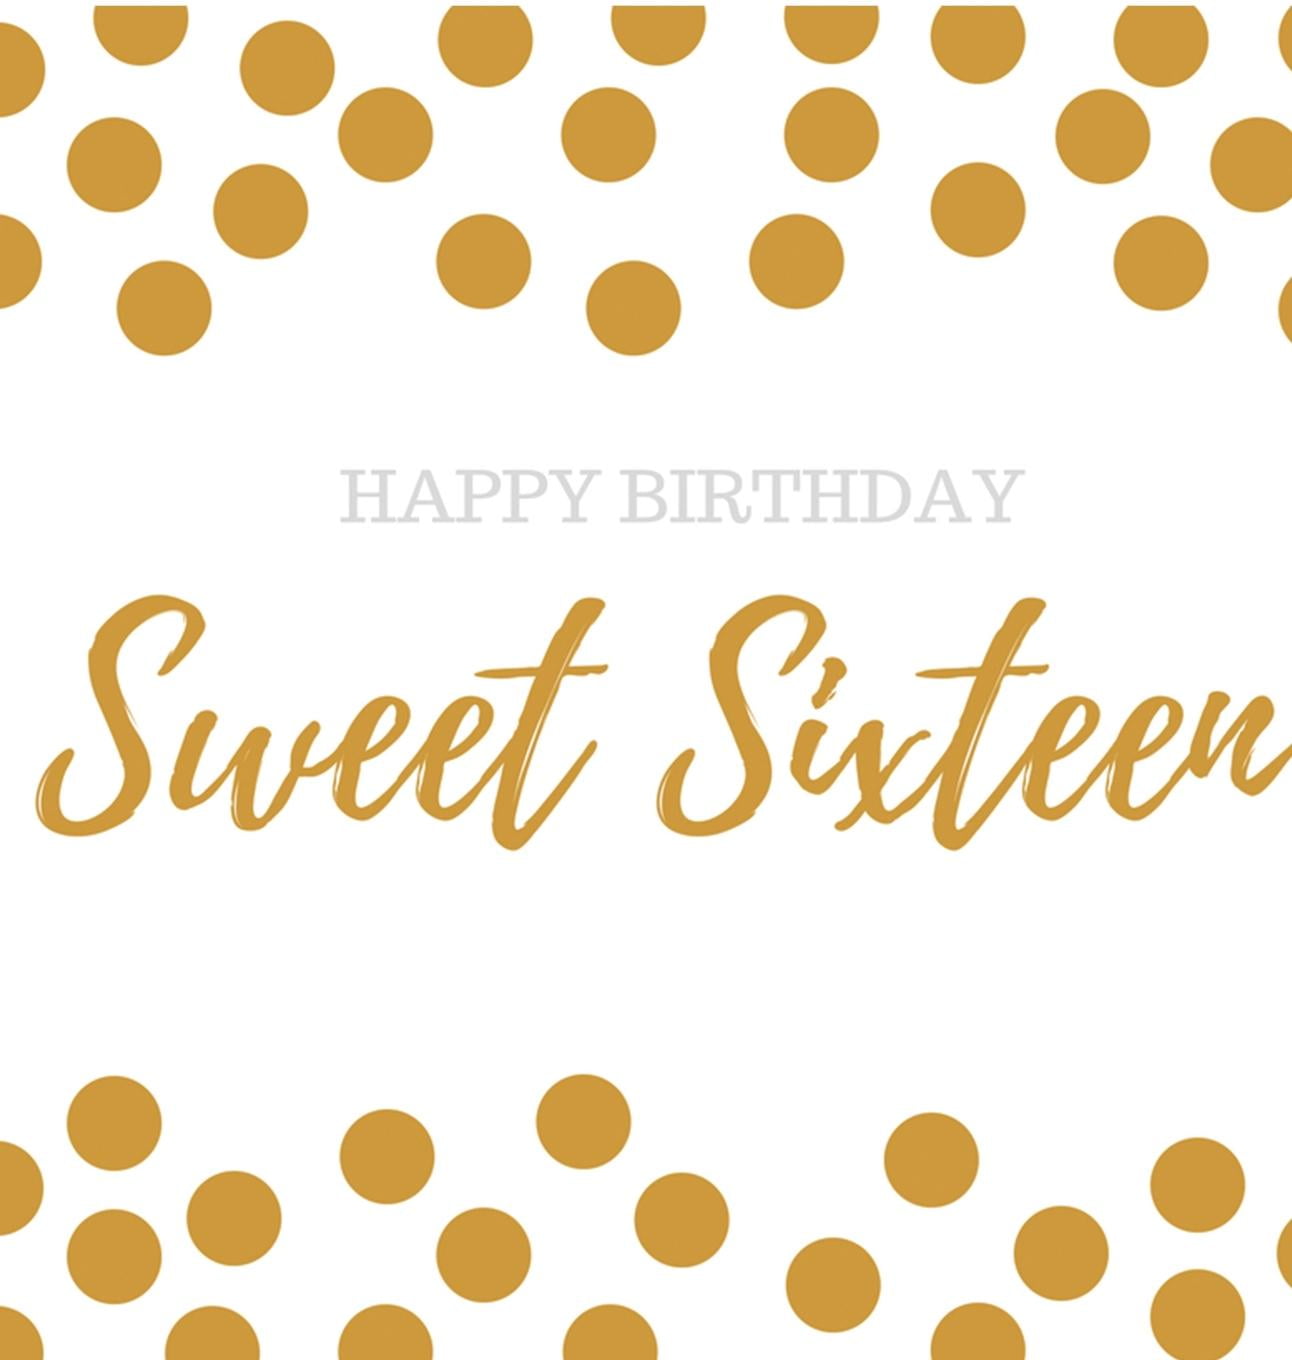 Happy Birthday 16. Booklet Sweets. Sweet book